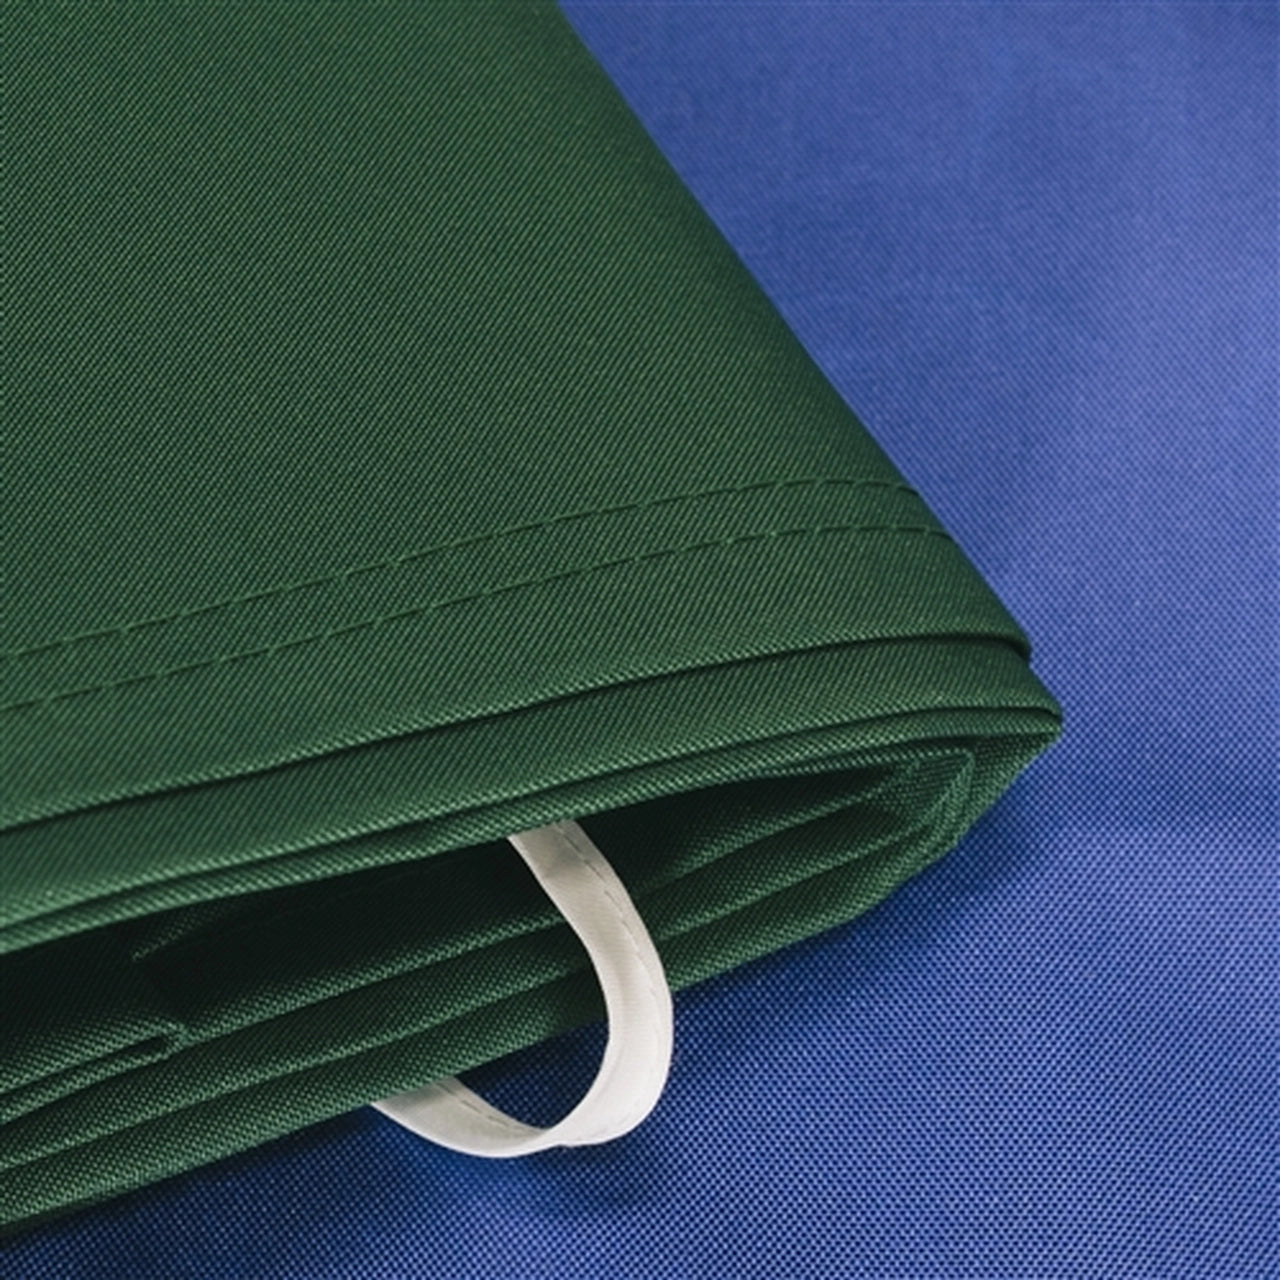 Aleko Protective Awning Cover - 13 x 10 Feet - Green